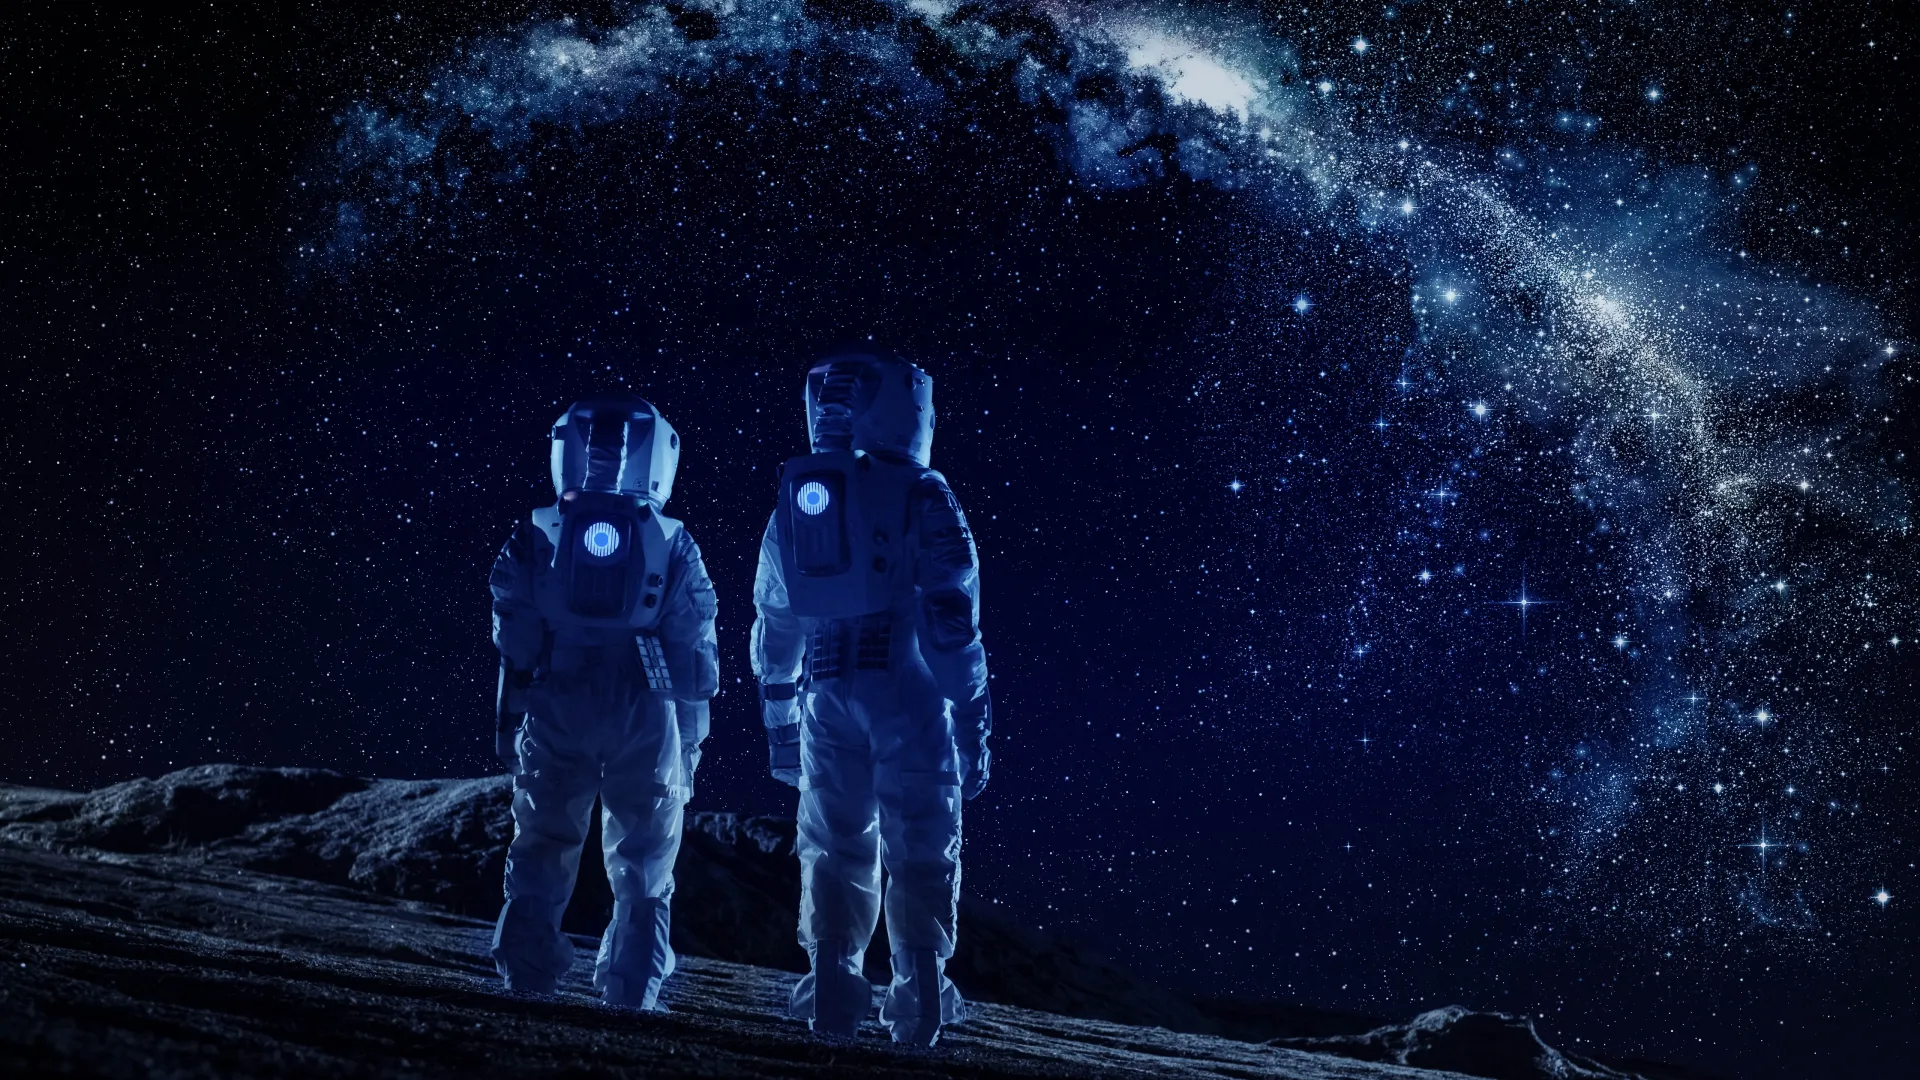 Galactic Tourism: The Future of Space Travel